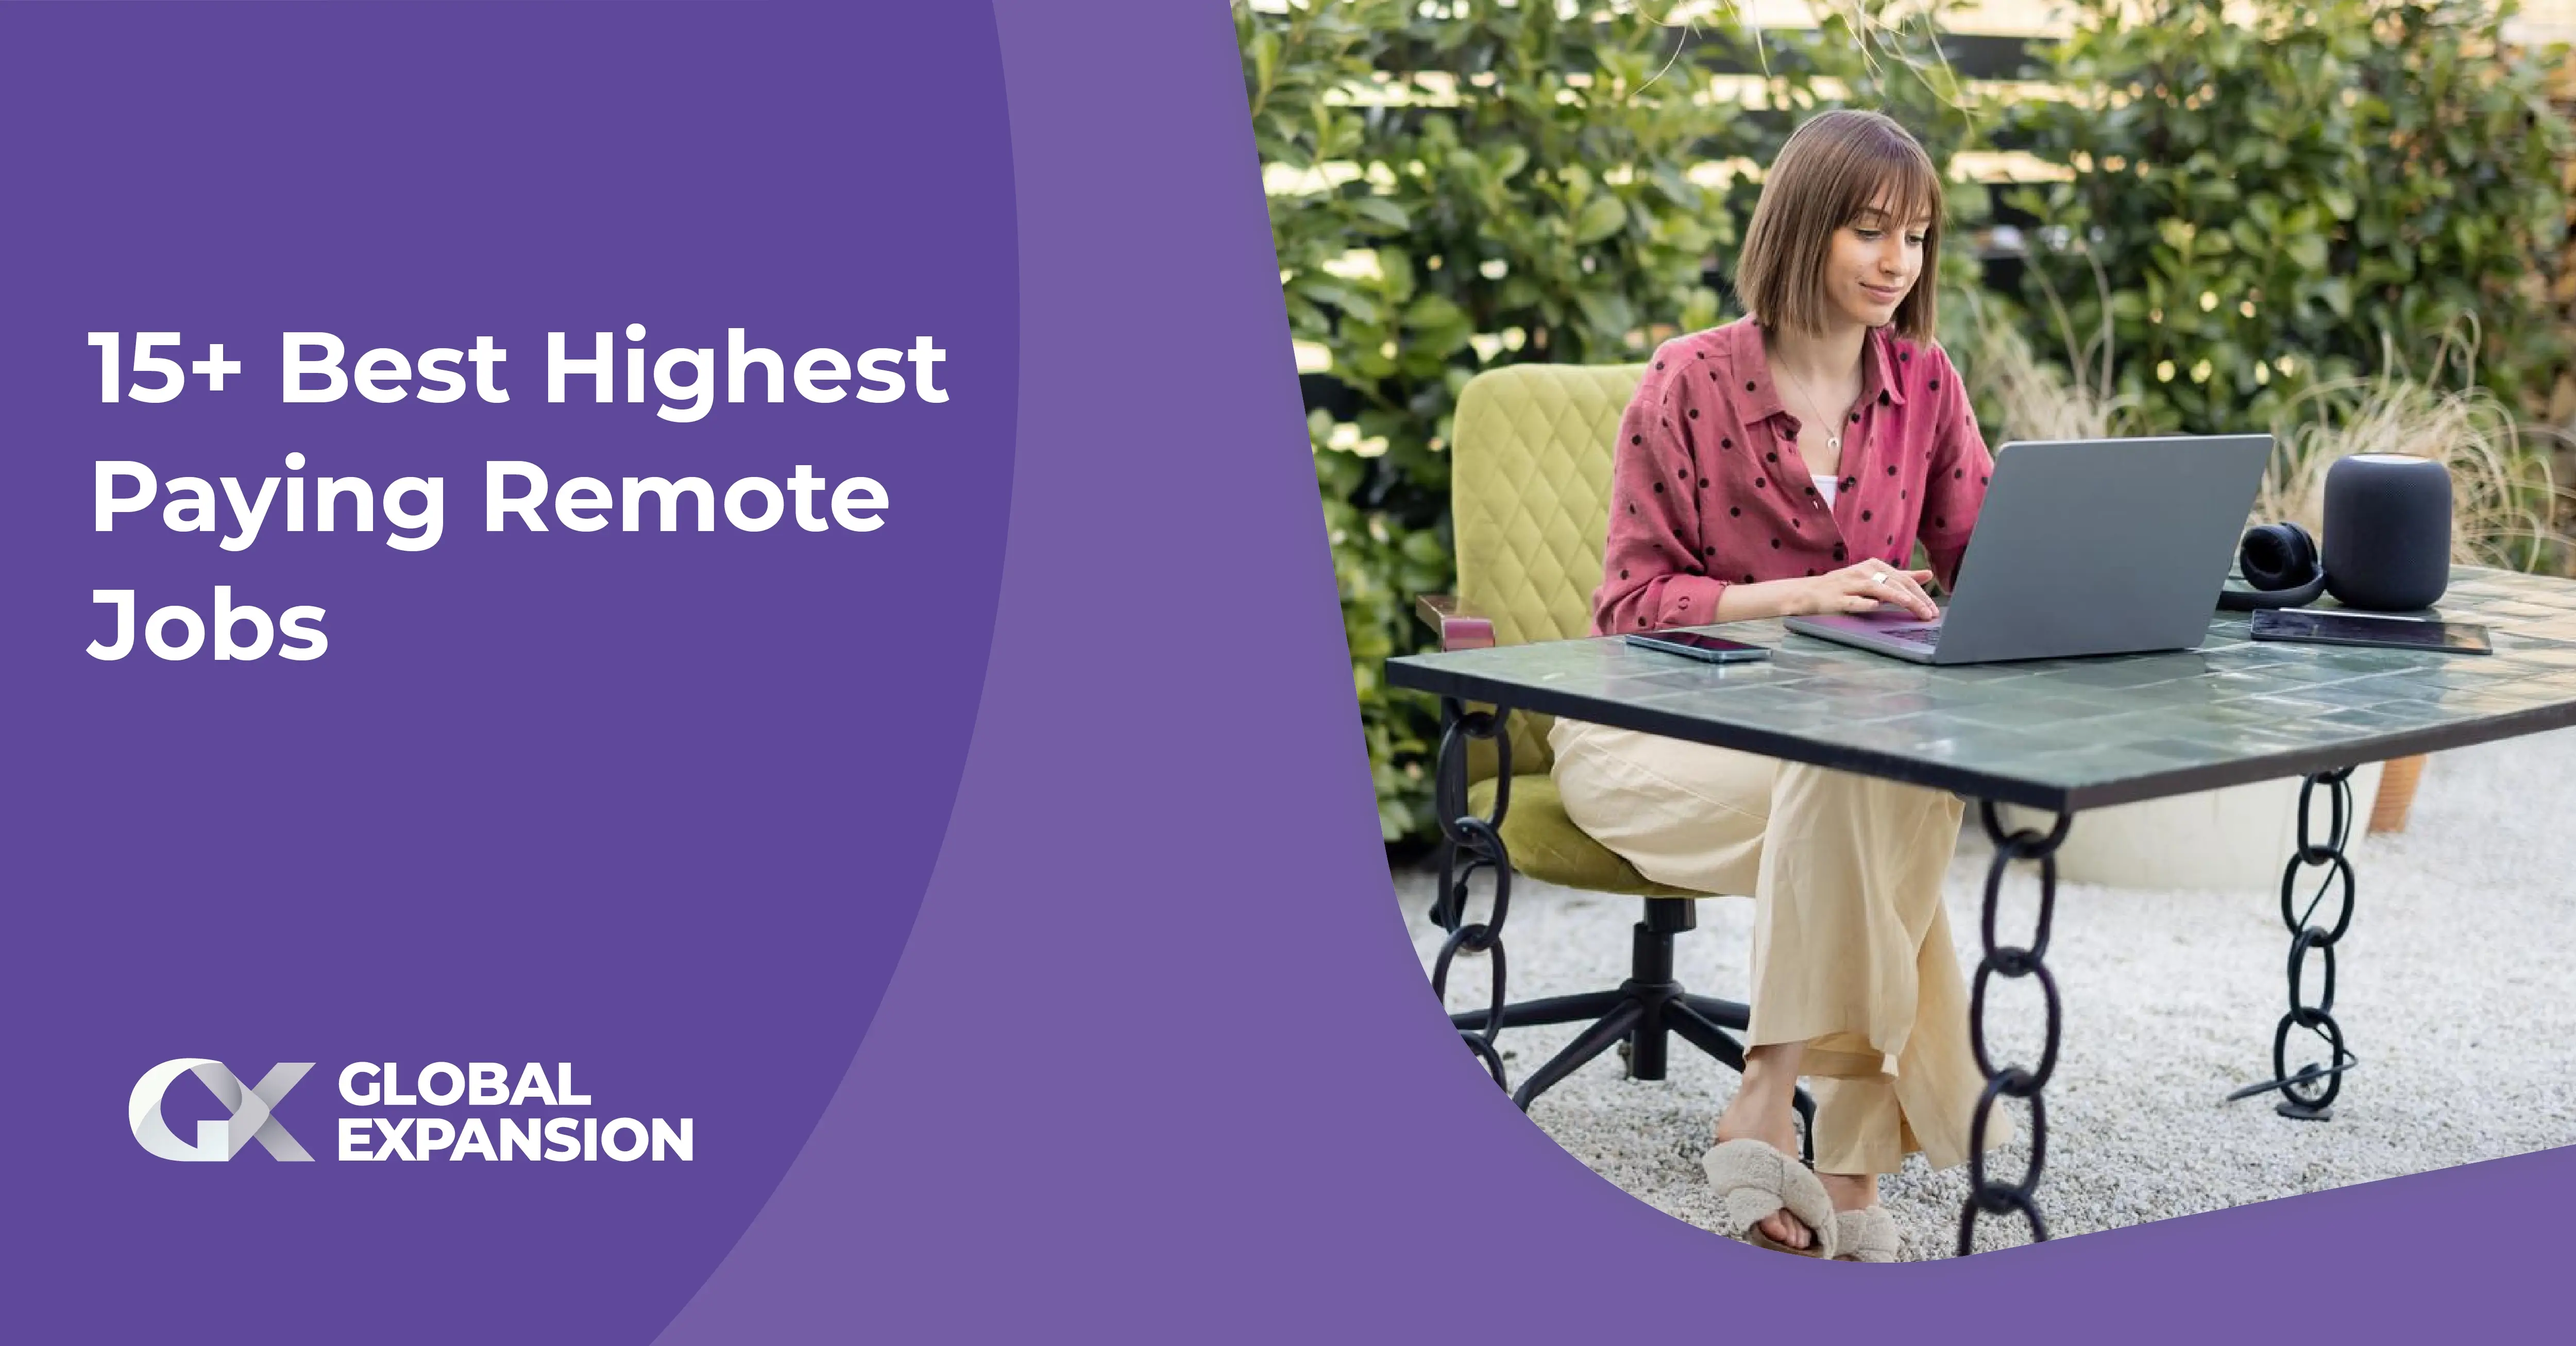 15+ Best Highest Paying Remote Jobs